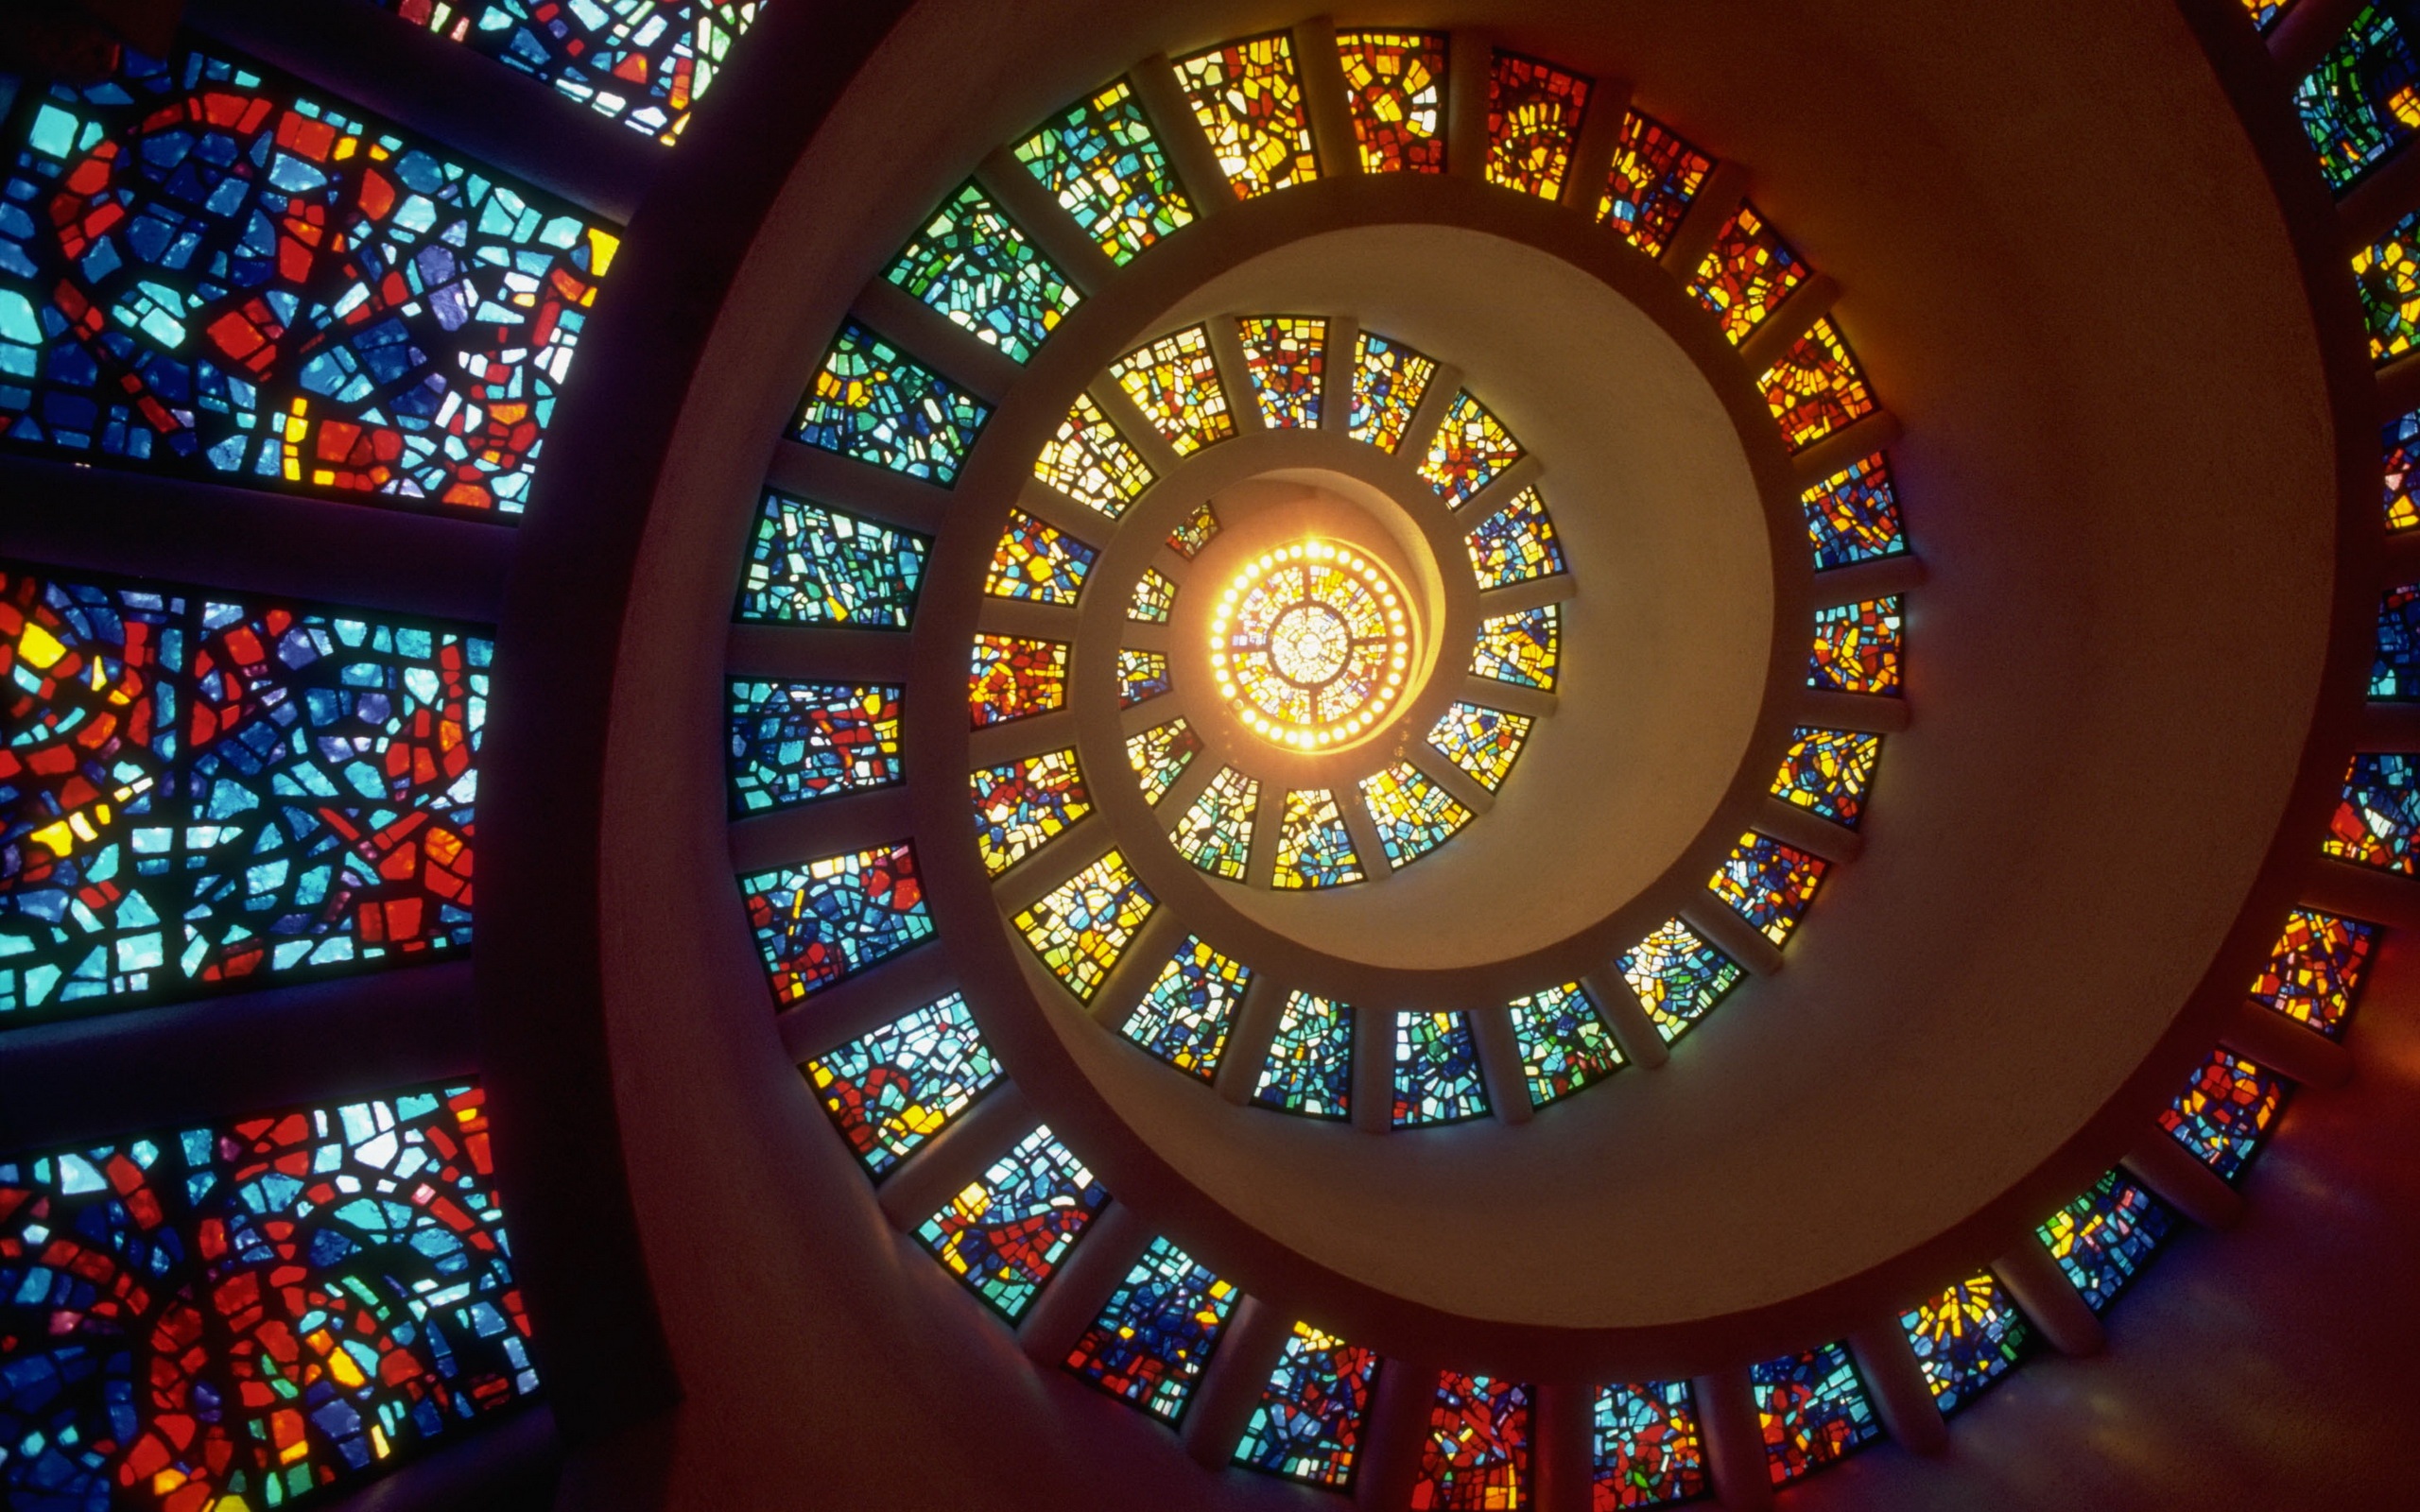 Previous, Creative Wallpaper - Stained-glass windows wallpaper